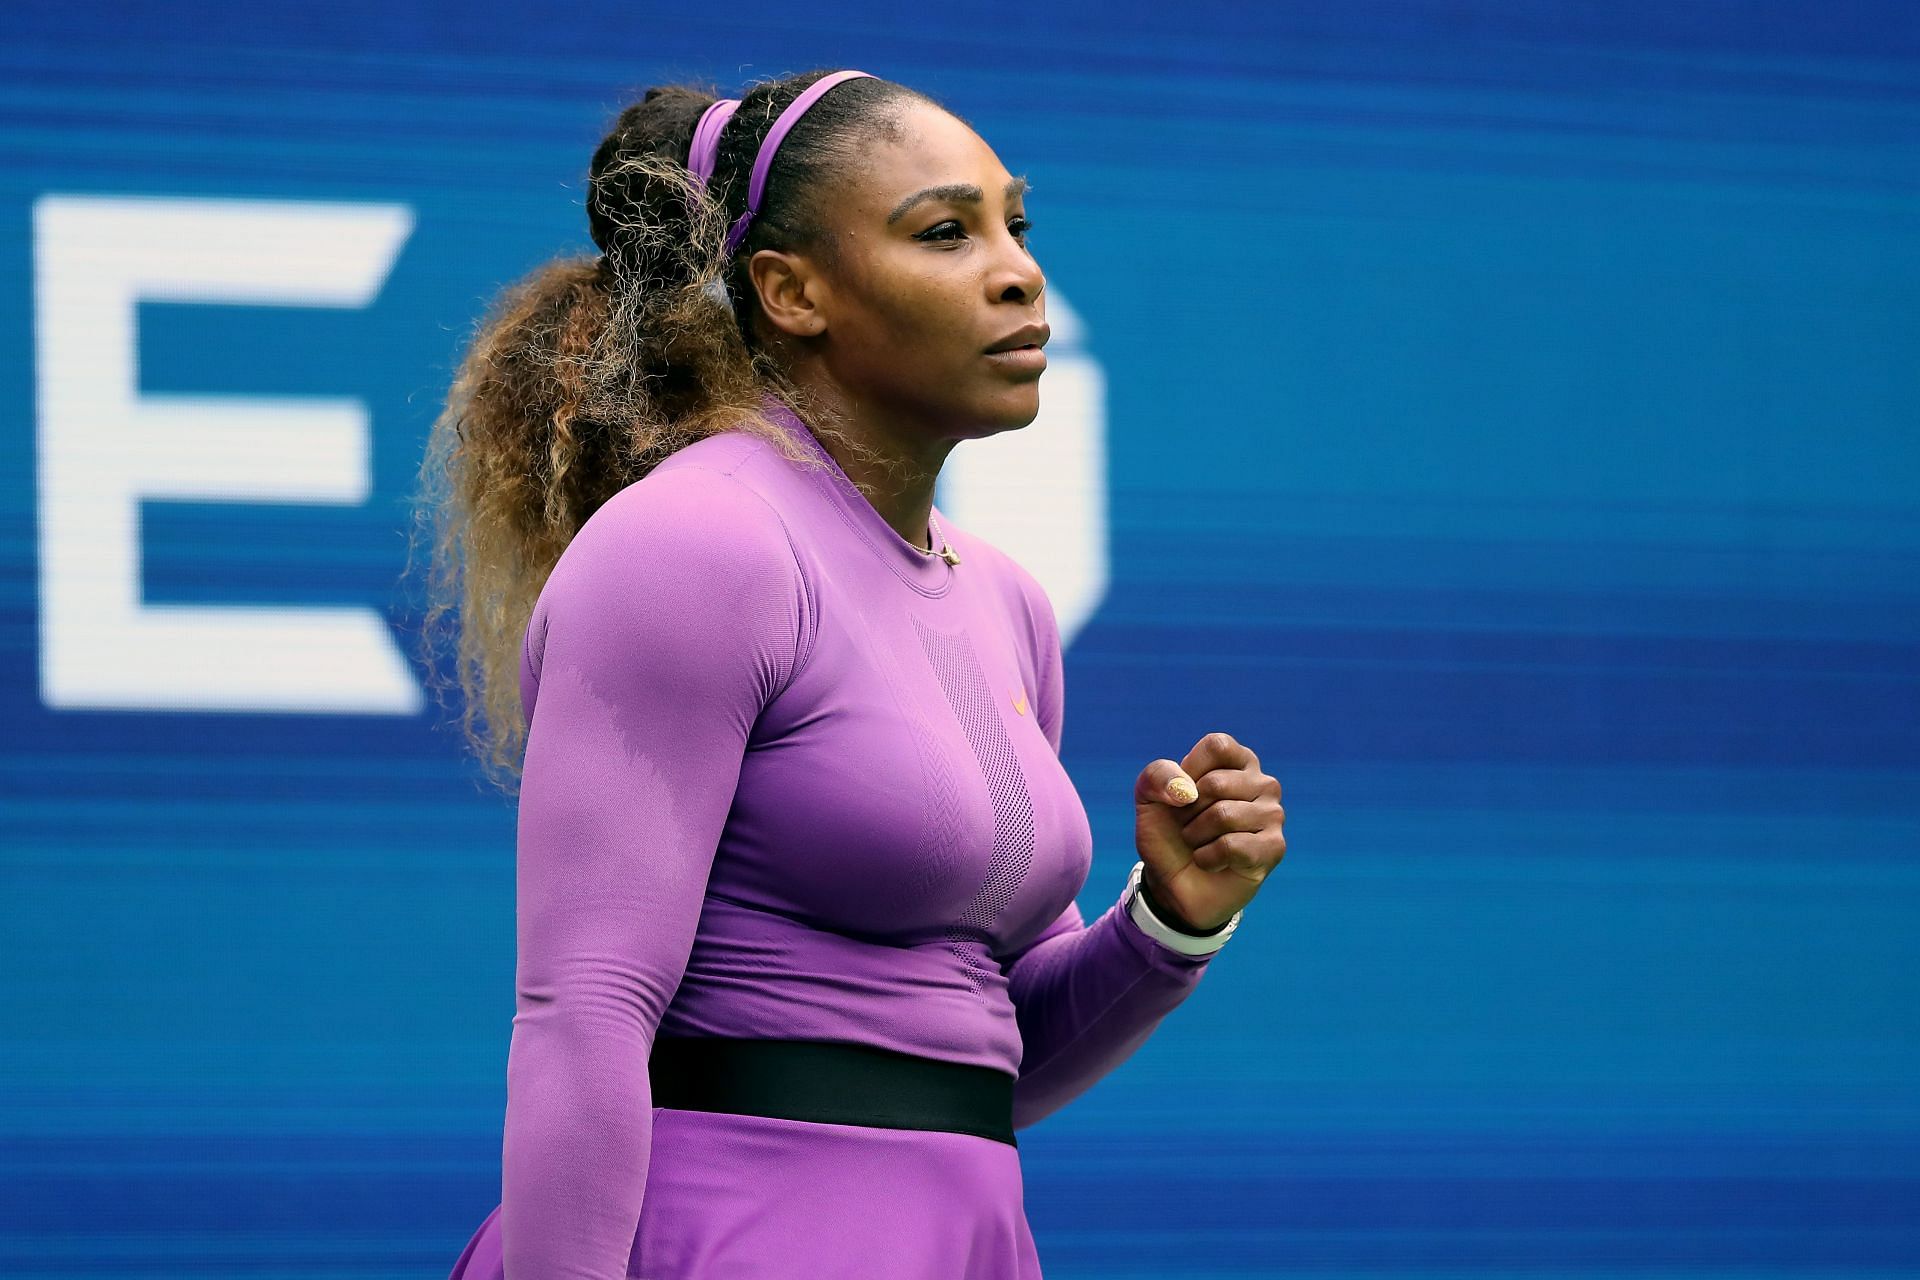 Serena Williams in action at the US Open